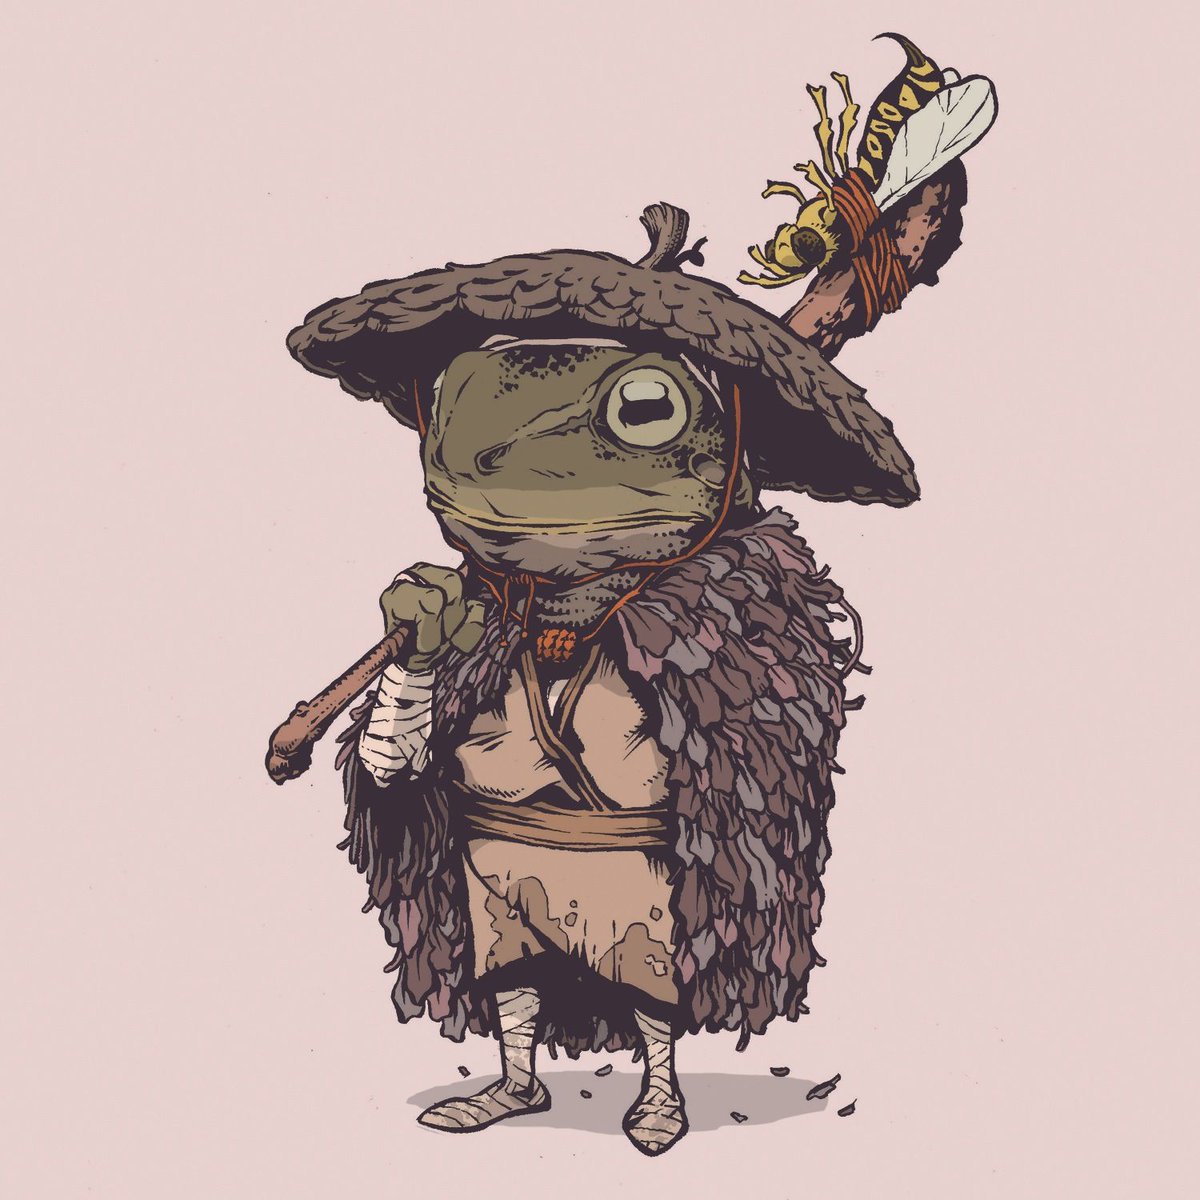 Completed another playable group for Bhakashal today, the Togmu (frog people). The Togmu are a primarily urban group in Bhakashal, though they can be found in the marshes as well, many of their group moved to the city and established permanent residence there years ago.